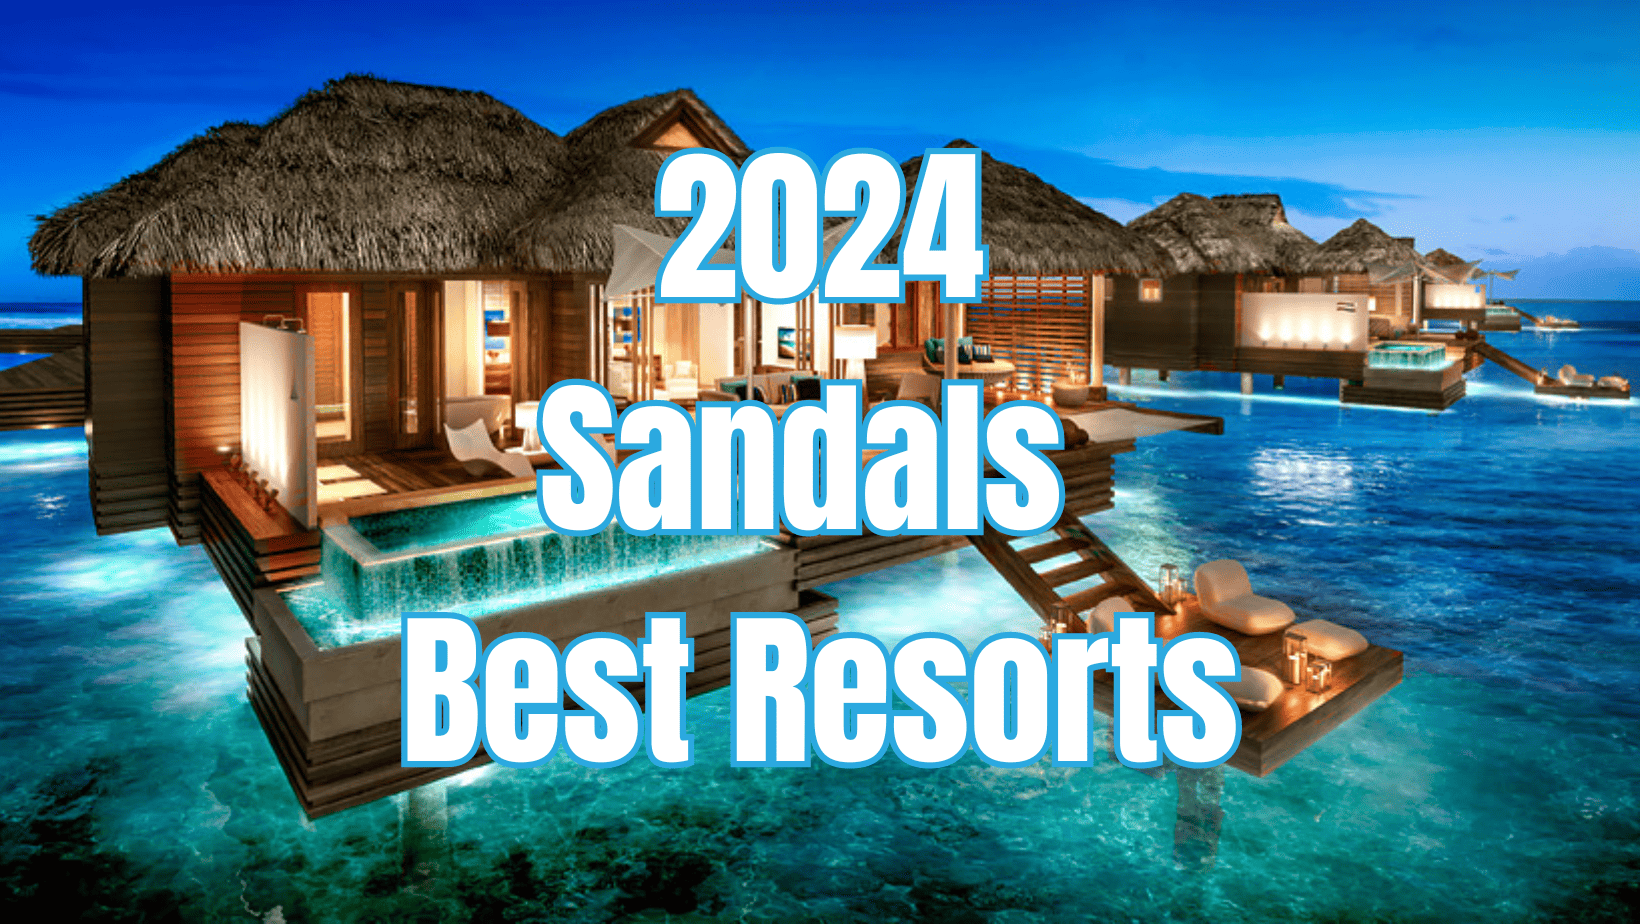 Best Deal on a Sandals or Beaches Vacation